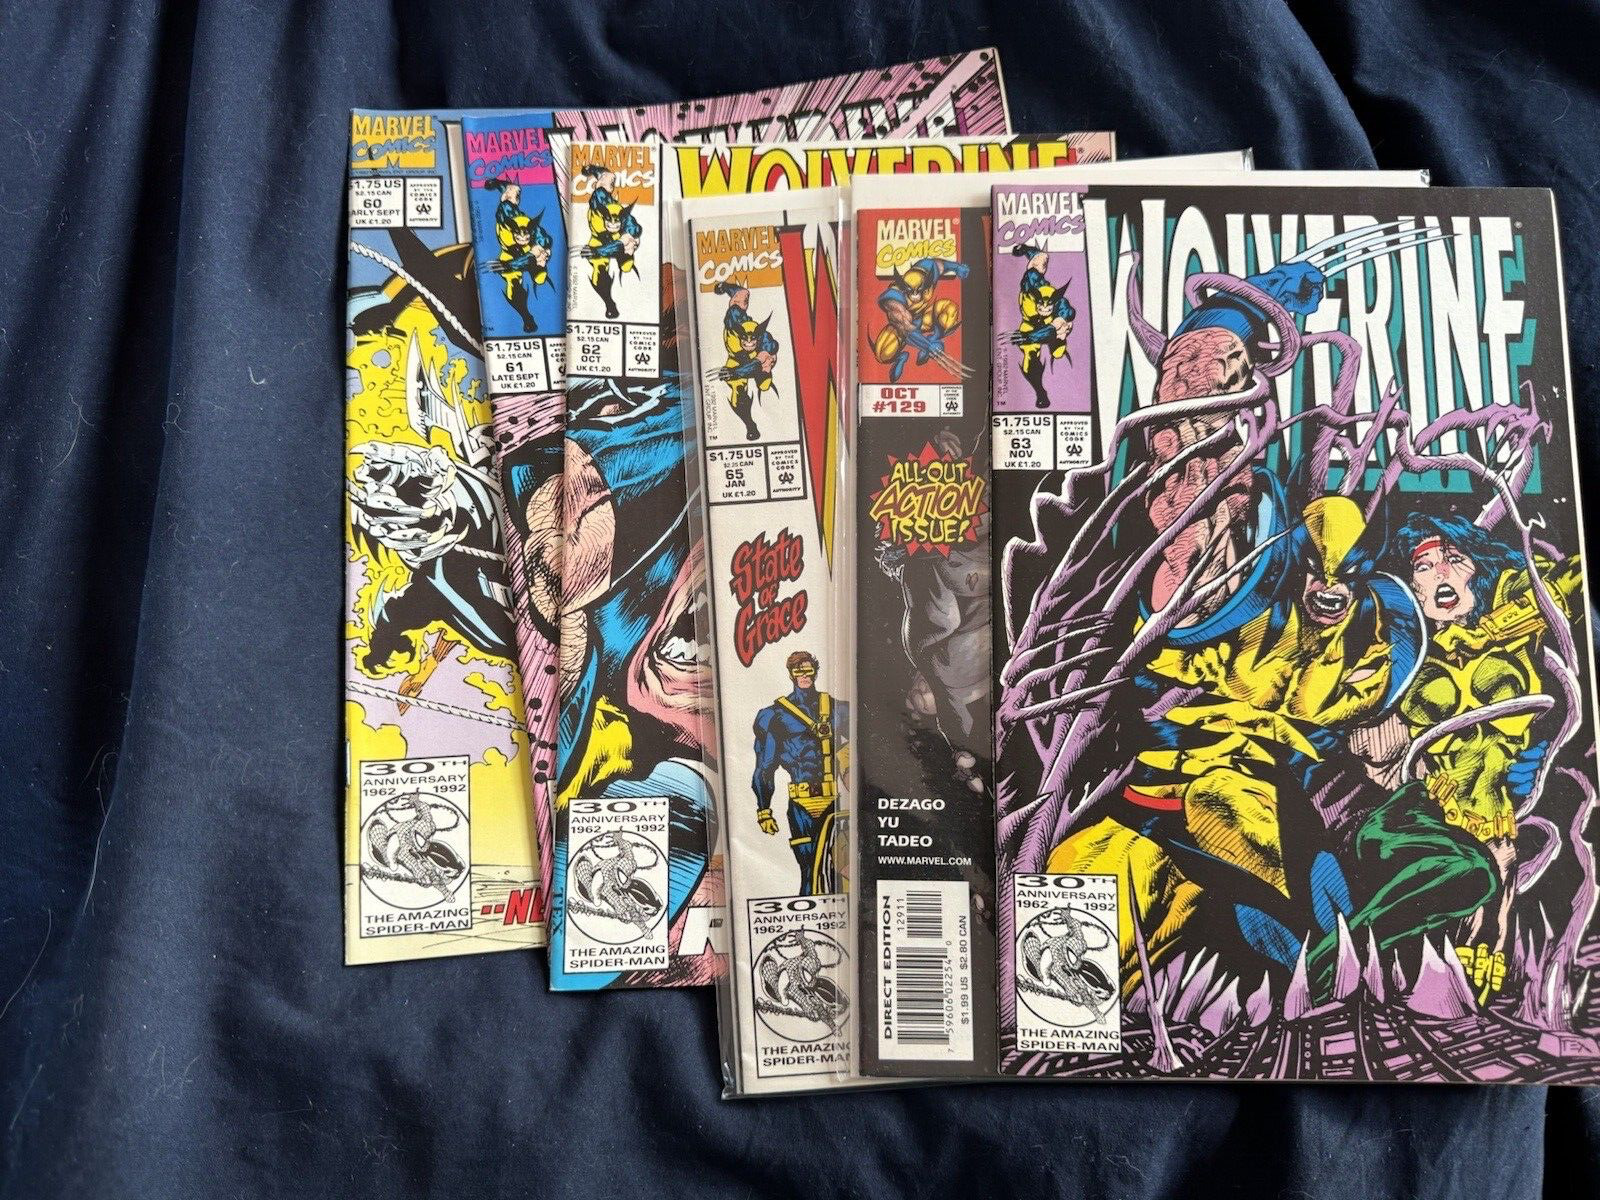 Wolverine comic book lot of 37 diff. books - all issue #s inside #21 and higher